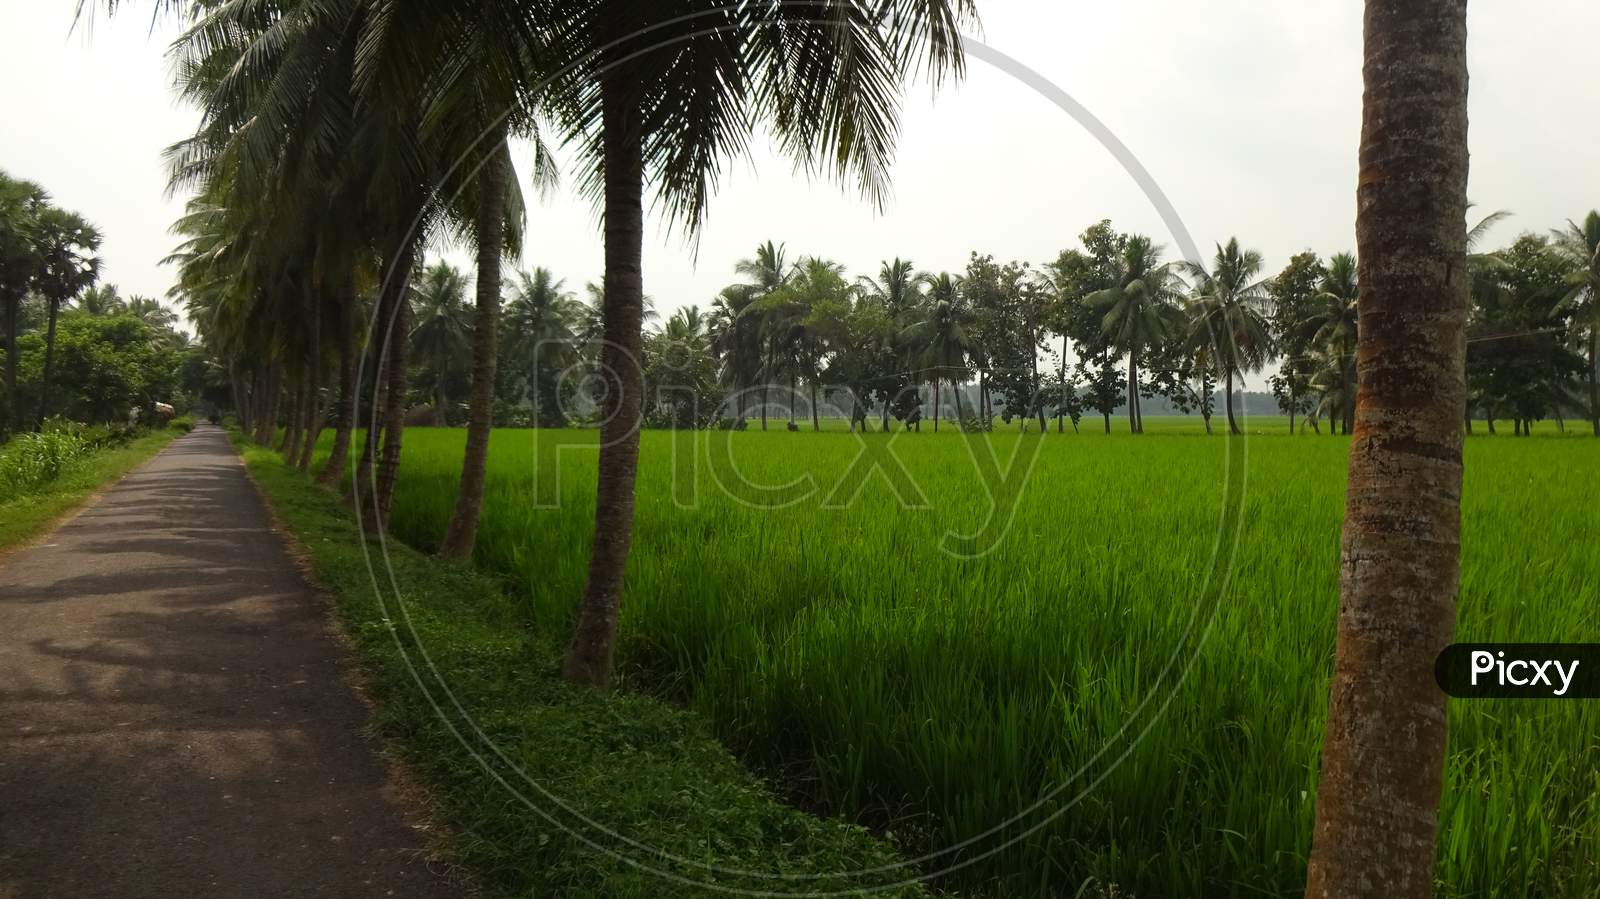 the beauty of rice fields in the village